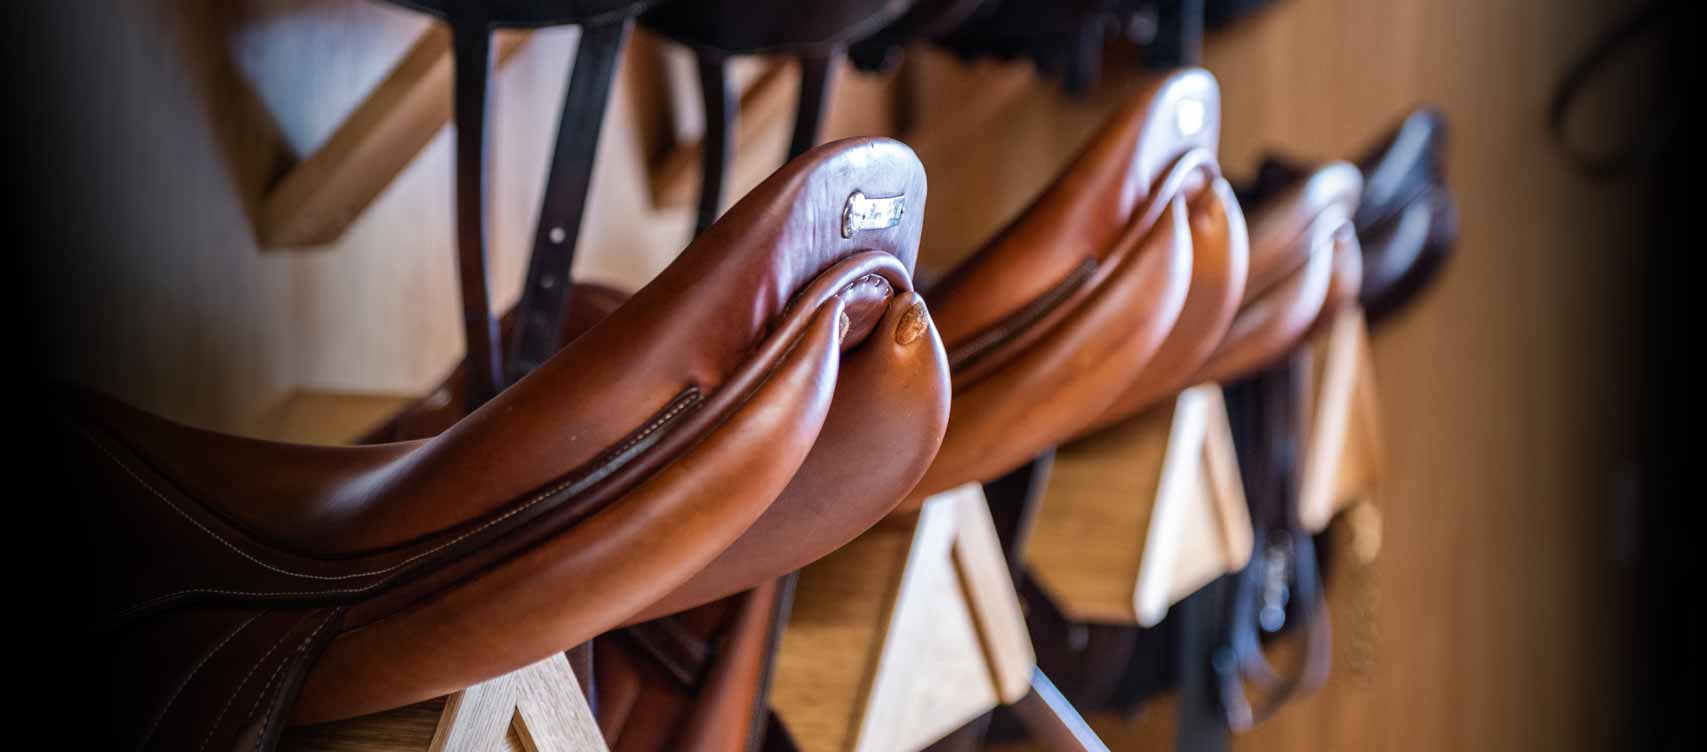 Our aim is to provide the best possible care for your saddlery and bridlework